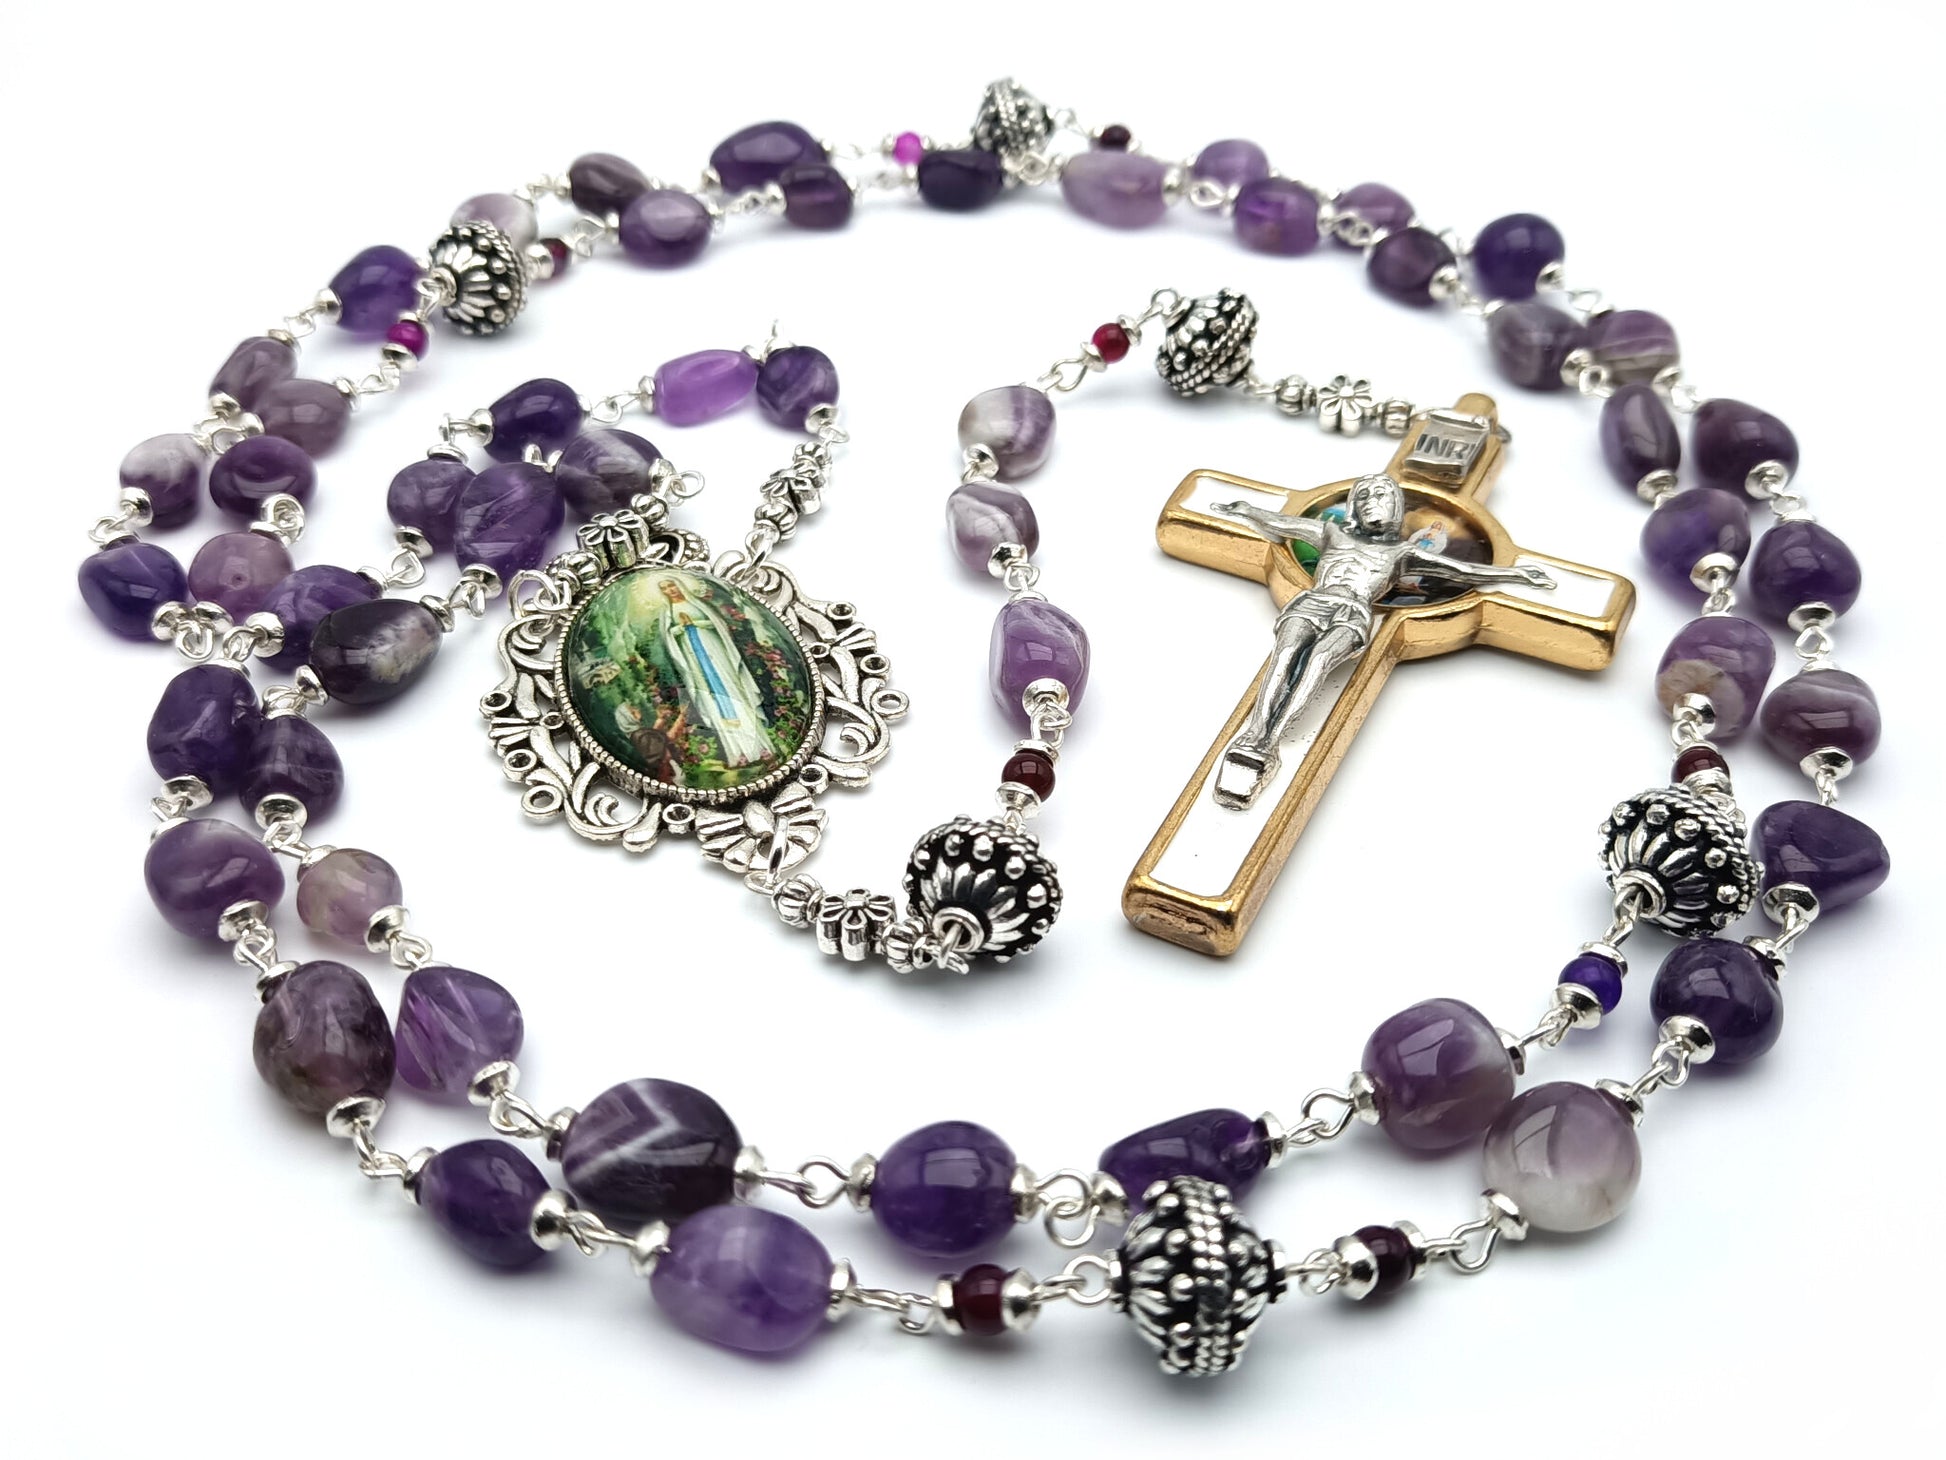 Our Lady of Lourdes unique rosary beads with purple gemstone beads, gold and white enamel crucifix, silver pater beads and picture centre medal.